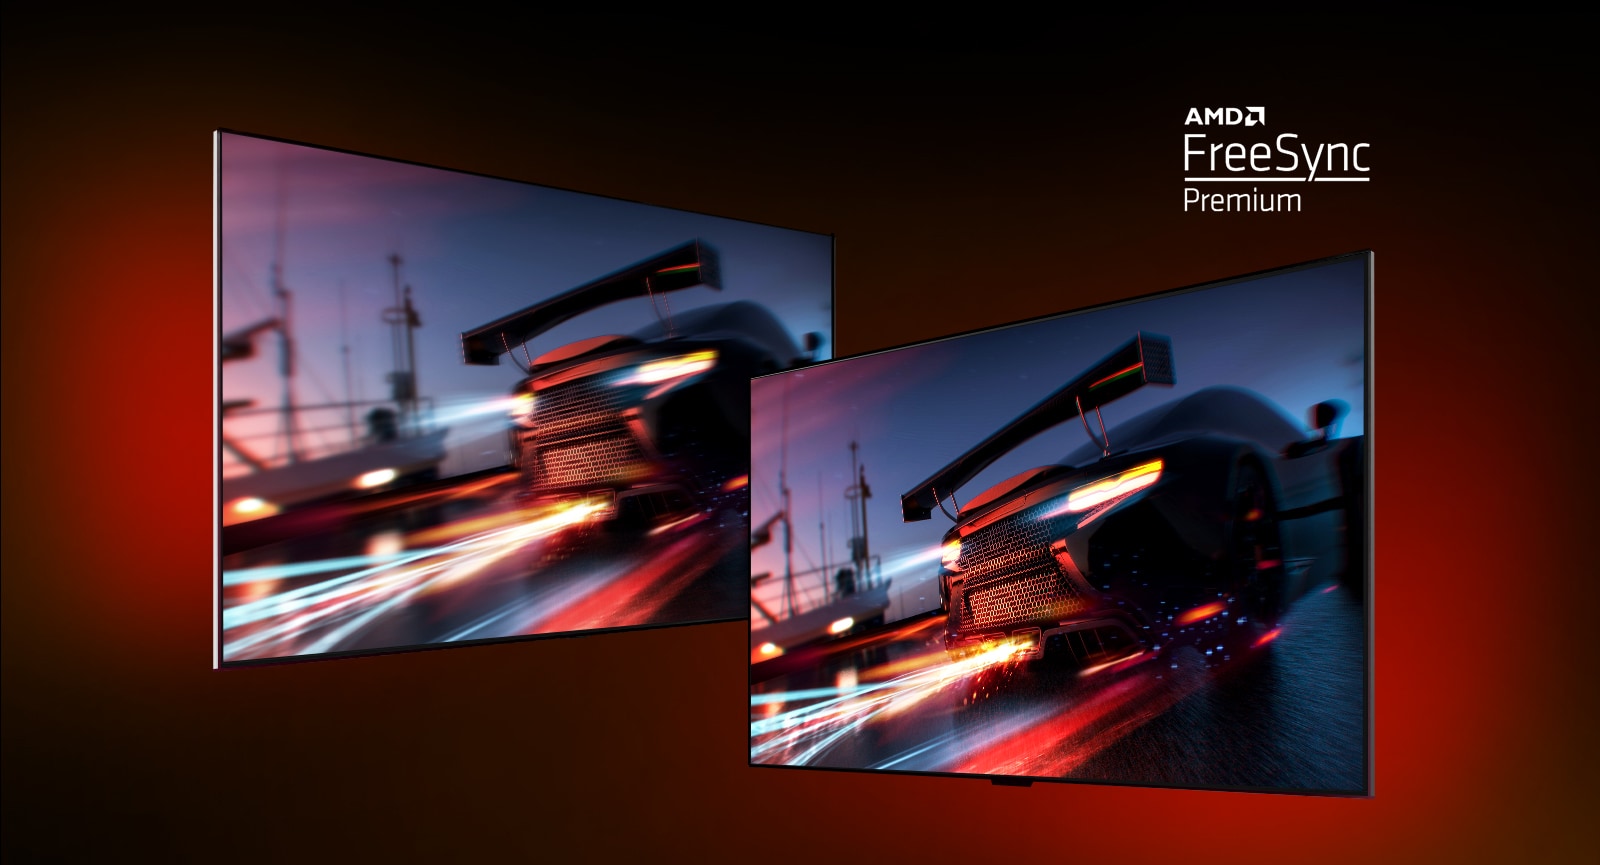 Two TVs - the left one shows a FORTNITE game scene with a racing car. On the right is also the same scene from the game, but with a brighter and clearer image. The AMD FreeSync premium logo is shown in the upper right corner. 